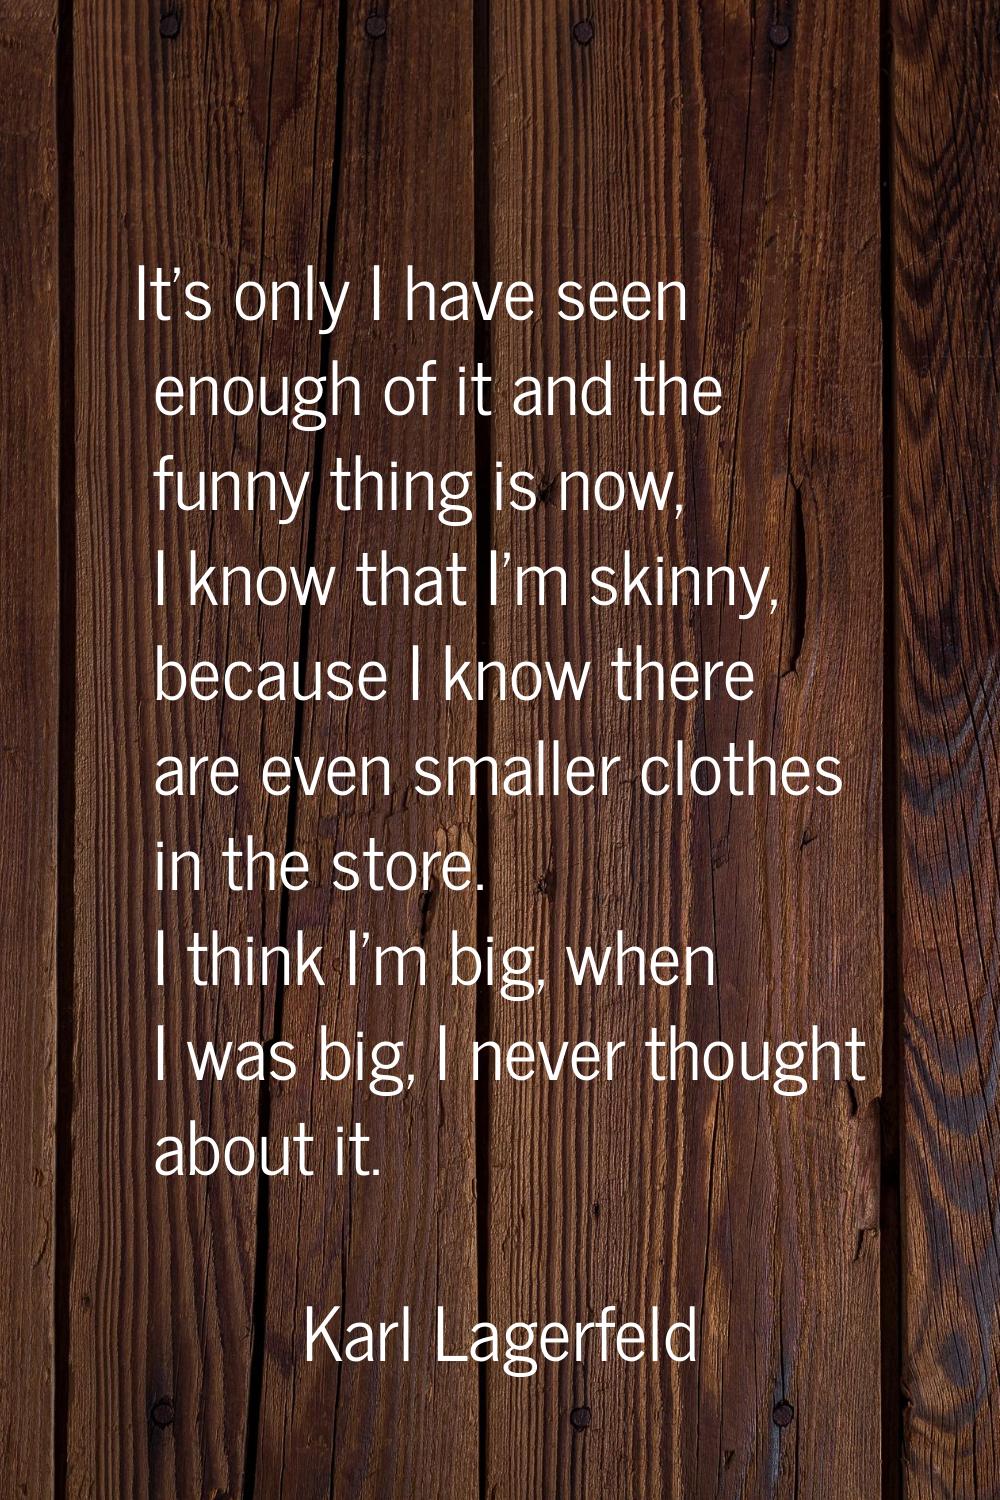 It's only I have seen enough of it and the funny thing is now, I know that I'm skinny, because I kn